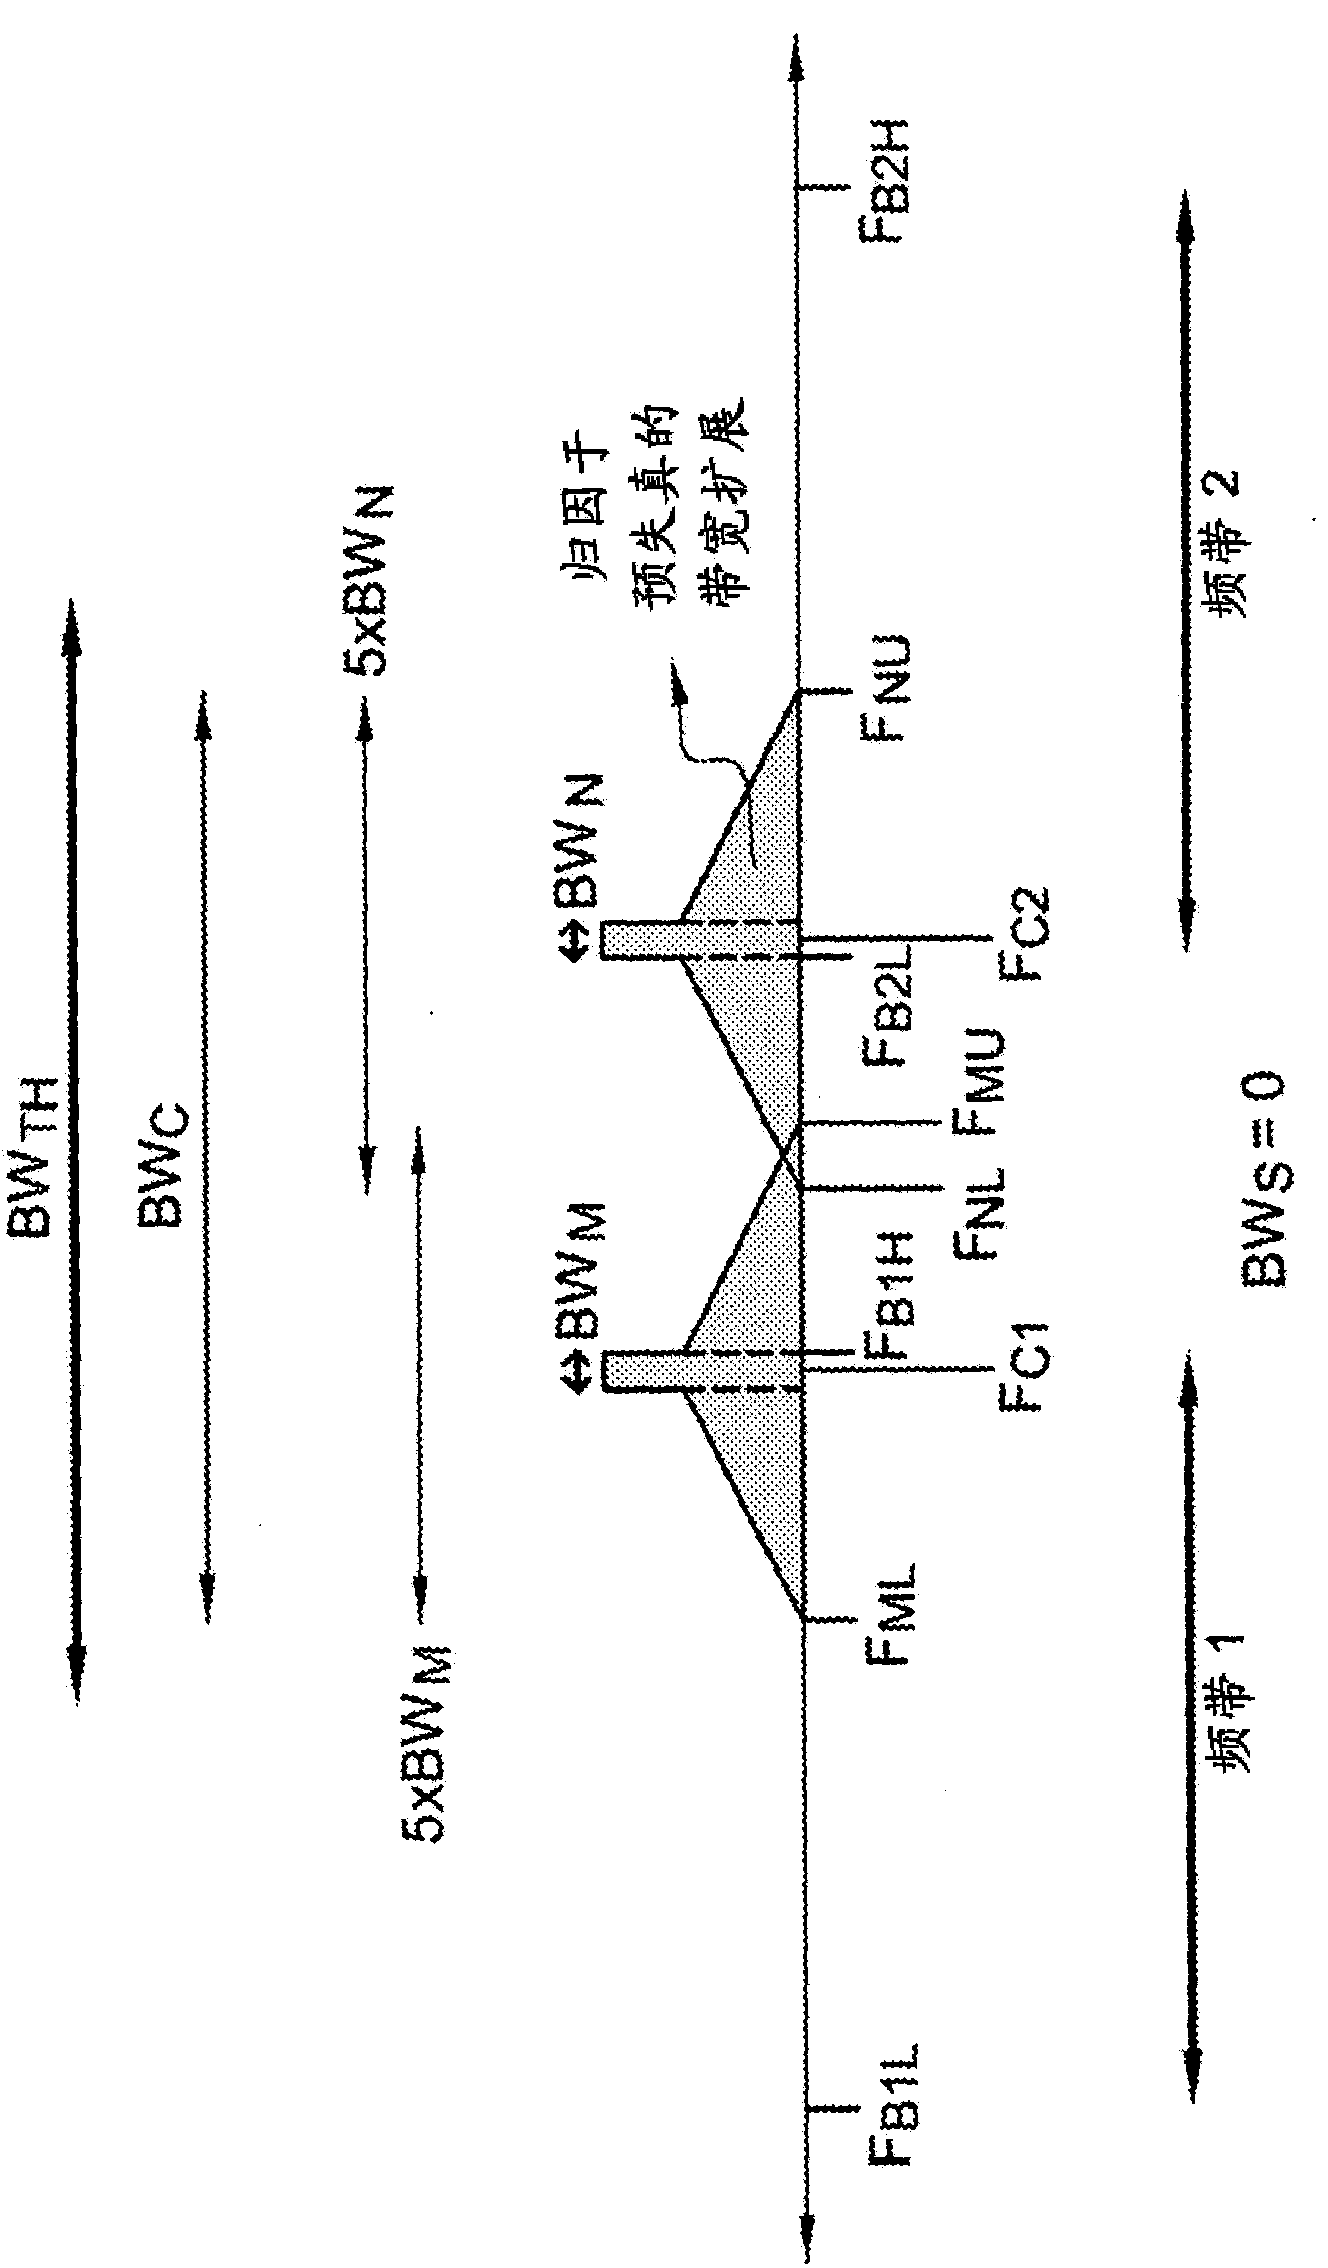 Linearization for a single power amplifier in a multi-band transmitter